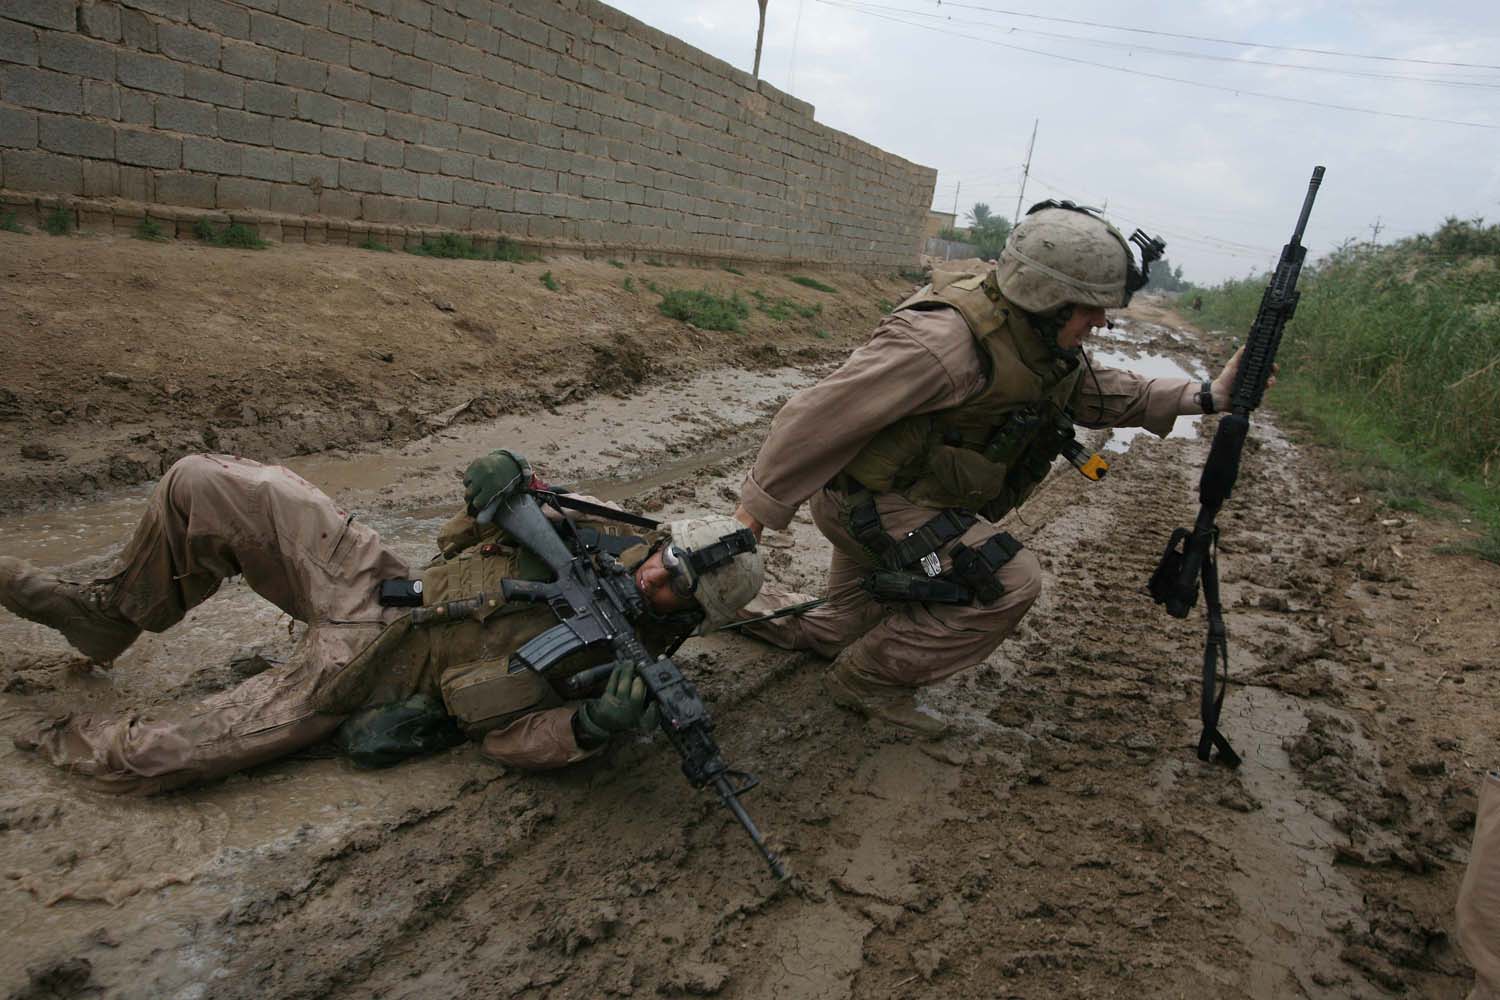 PLS HOLD UNTIL FAMILY IS NOTIFIED: Iraq: Karmah: October 31, 2006: Sgt Jesse E. Leach drags Lance CPL Juan Valdez of the for 4th mobile assault platoon Weapons company 2nd battalion 8th Marines to safety moments after he was shot by a sniper during a joined patrol with the Iraqi Army in Karmah, Anbar Province, Iraq. Valdez was shot through the arm and the right side but survuved. Photo: Joao Silva was shot by a sniper while on a patrol